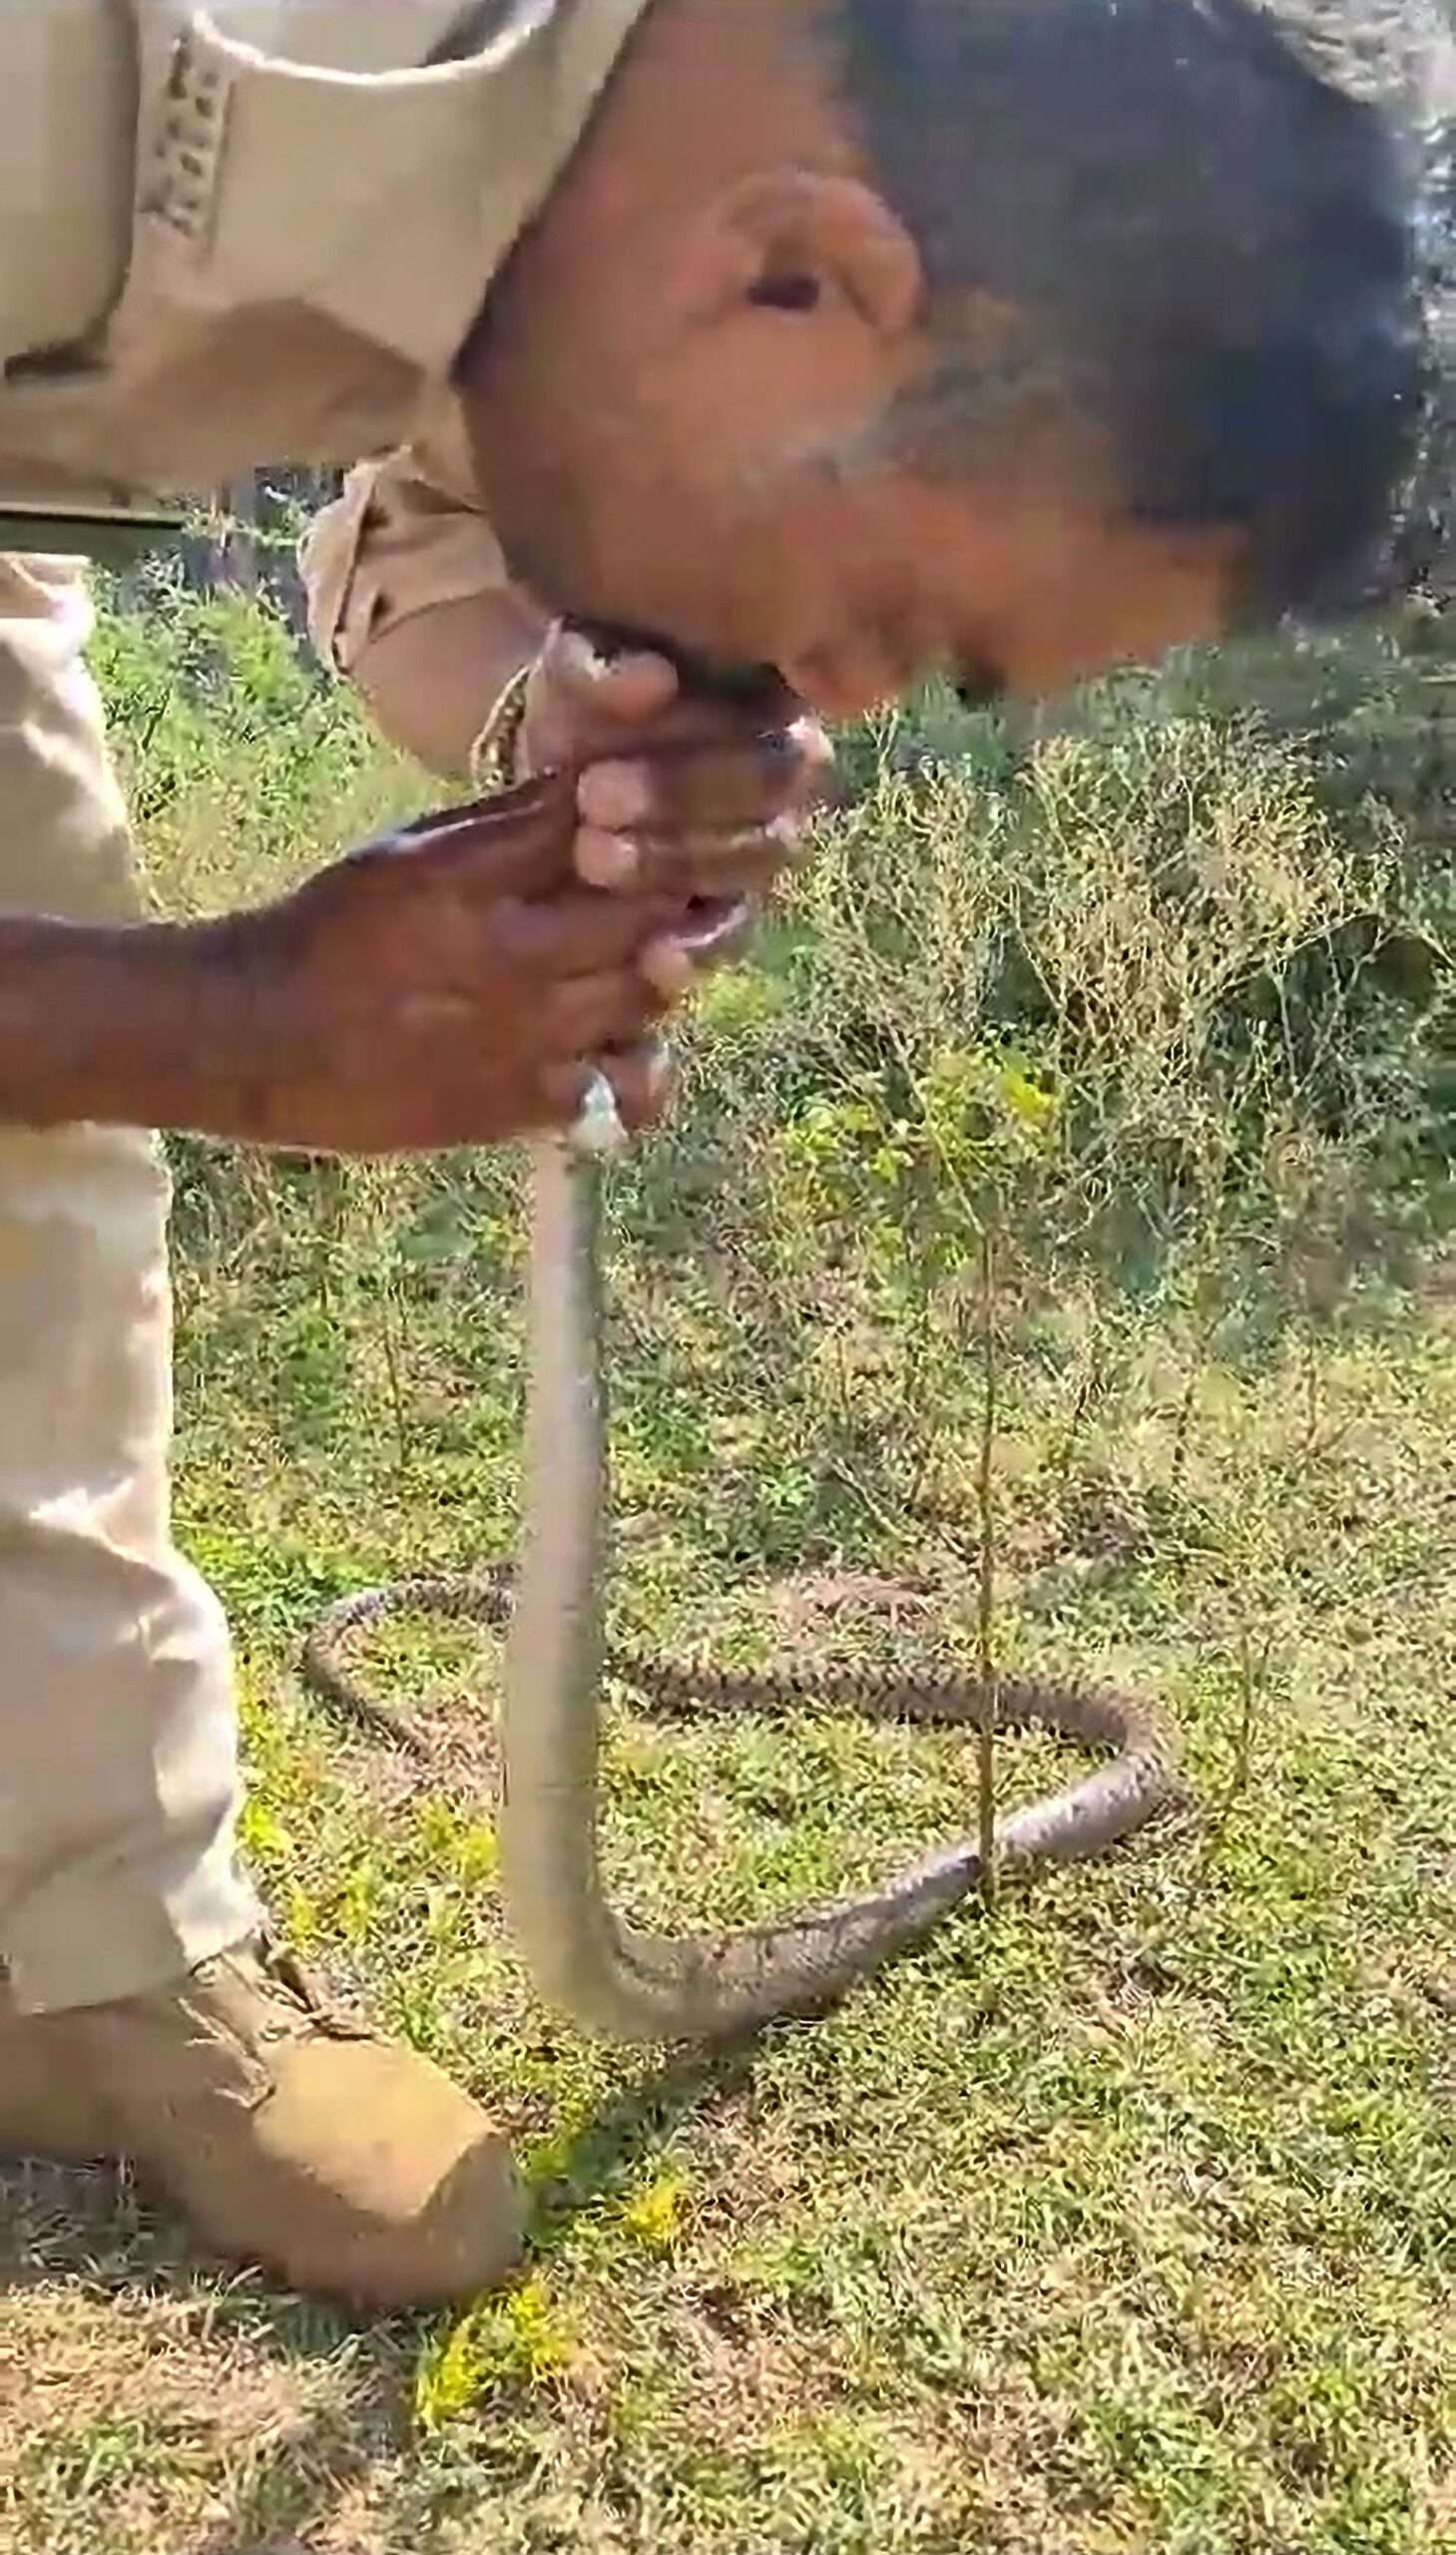 Read more about the article Cop Saves Poisoned Snake By Giving It Mouth-To-Mouth Resuscitation